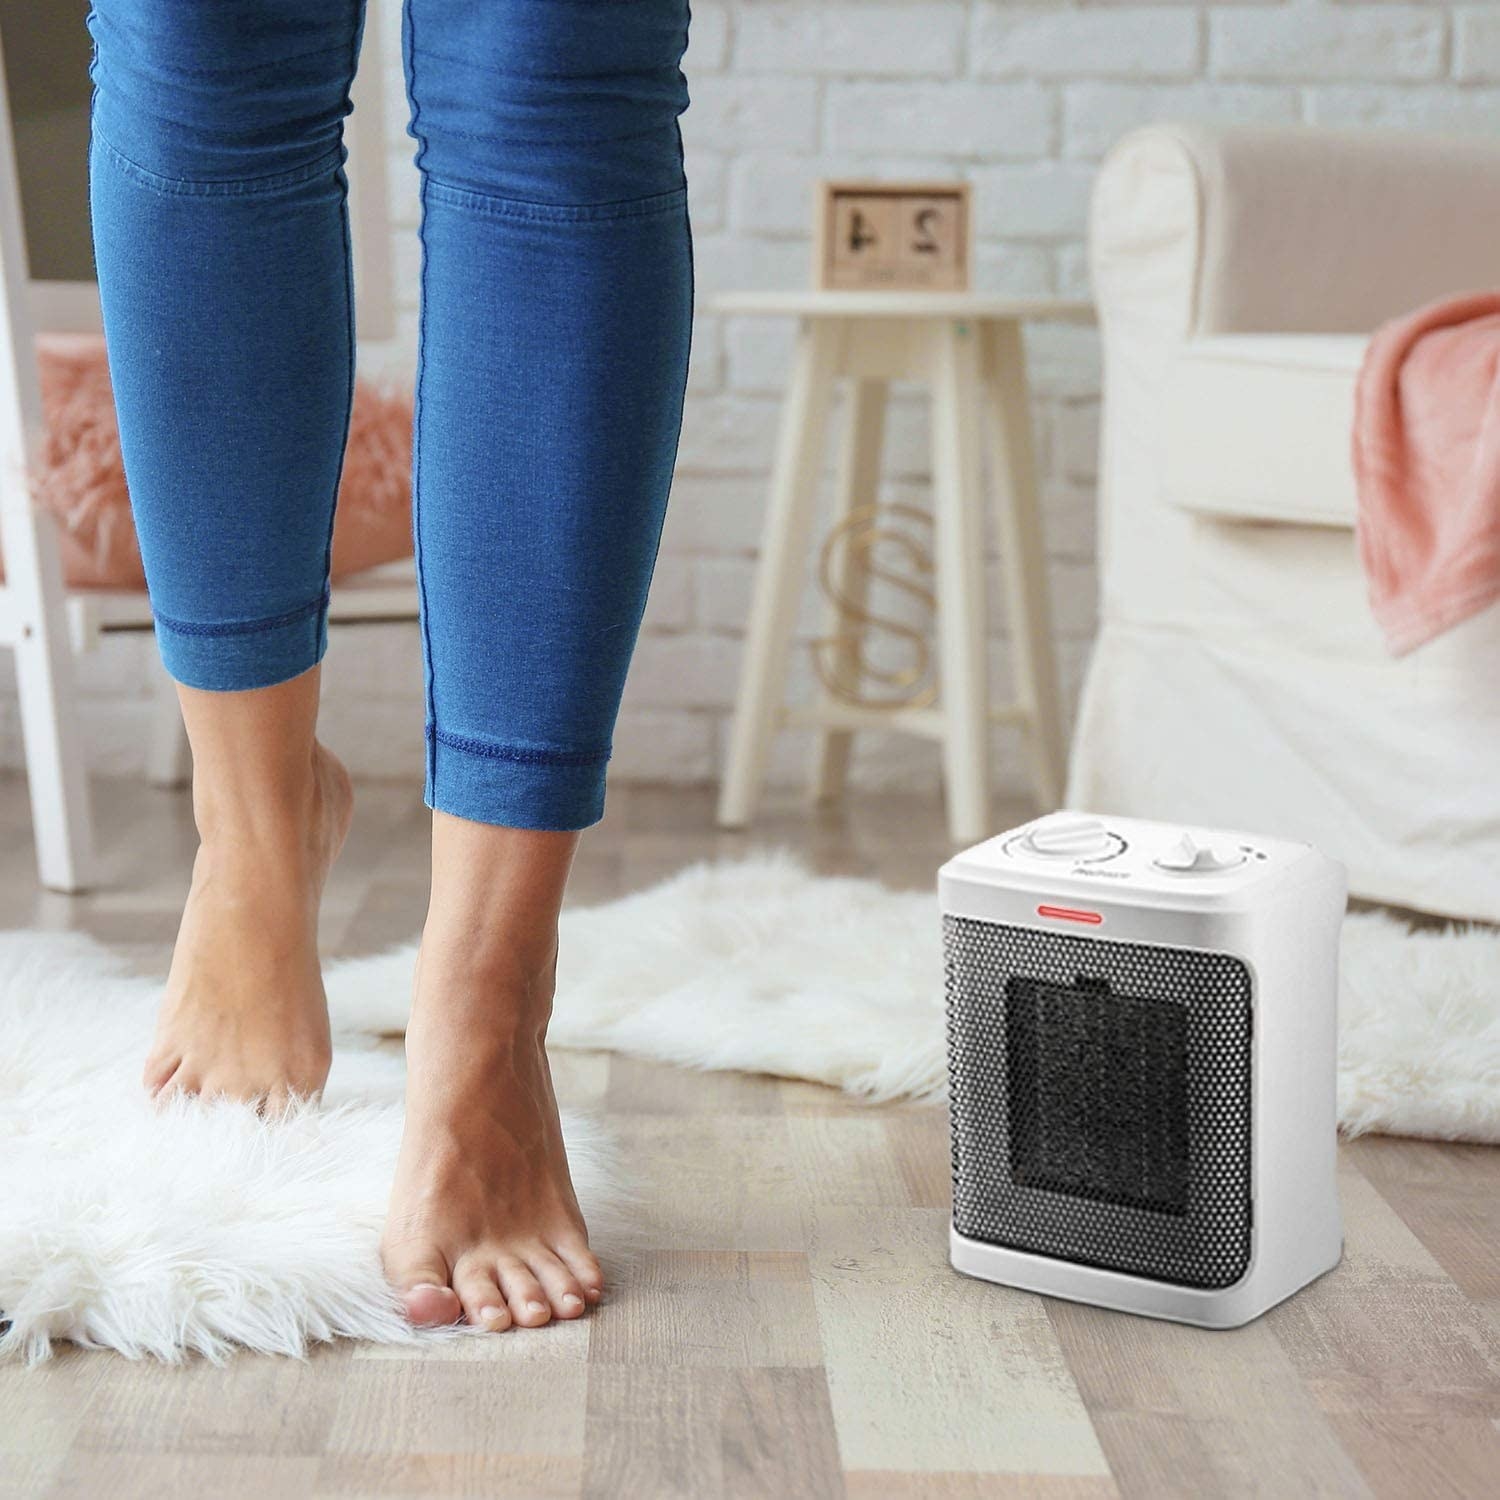 A person standing in their living room with a space heater next to their feet